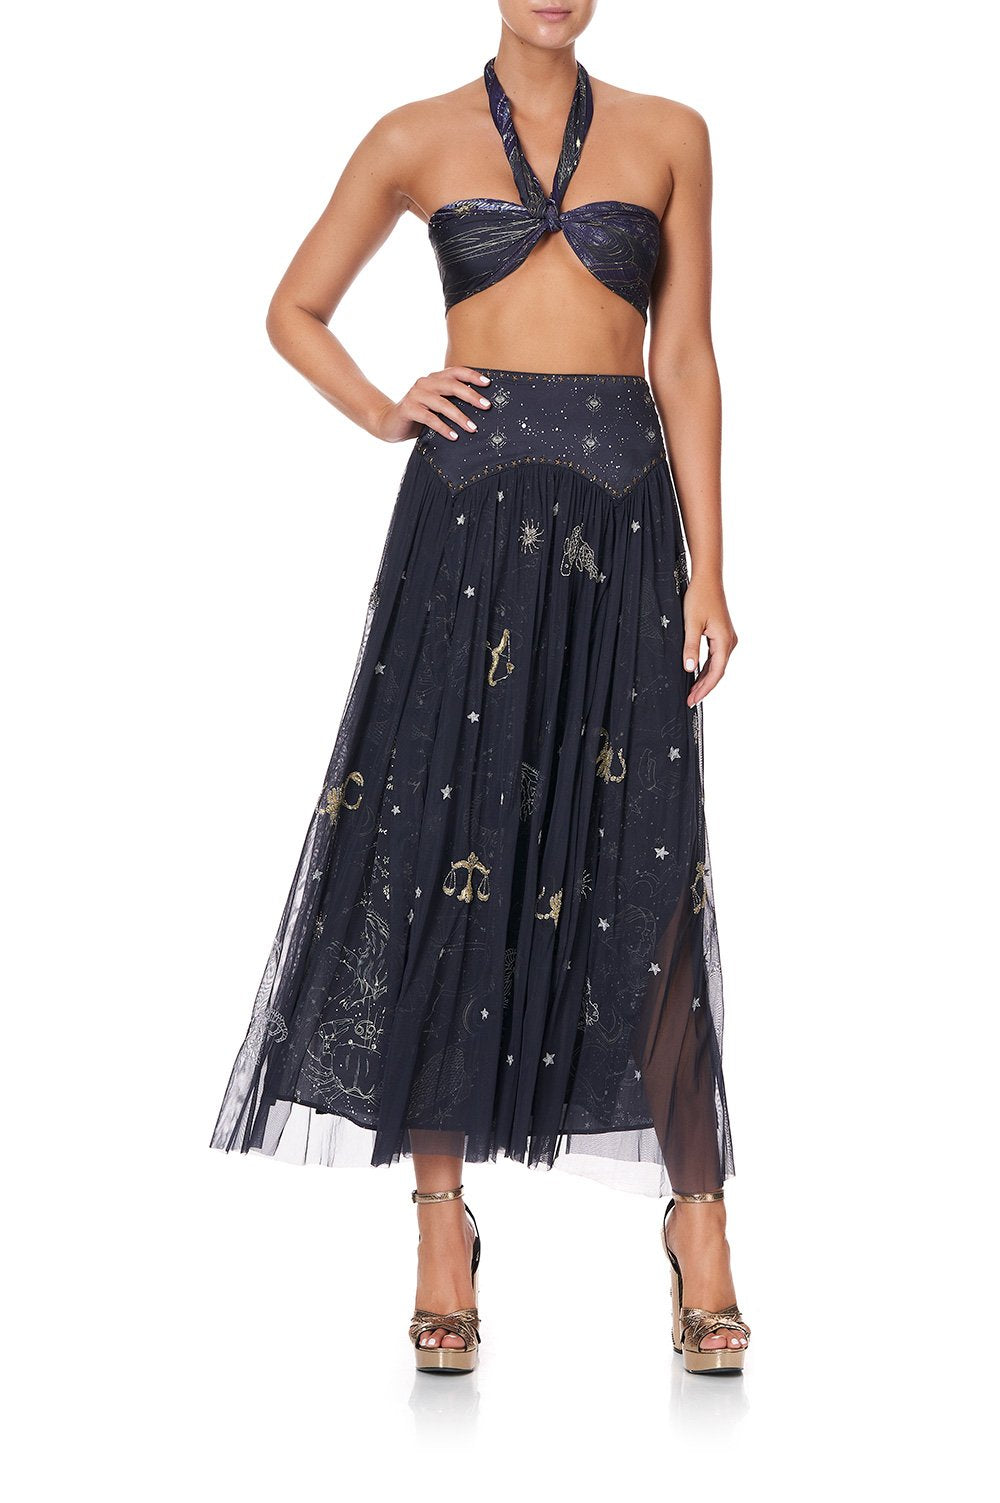 DOUBLE LAYER MAXI SKIRT WITH SHAPED YOKE ITS A SIGN